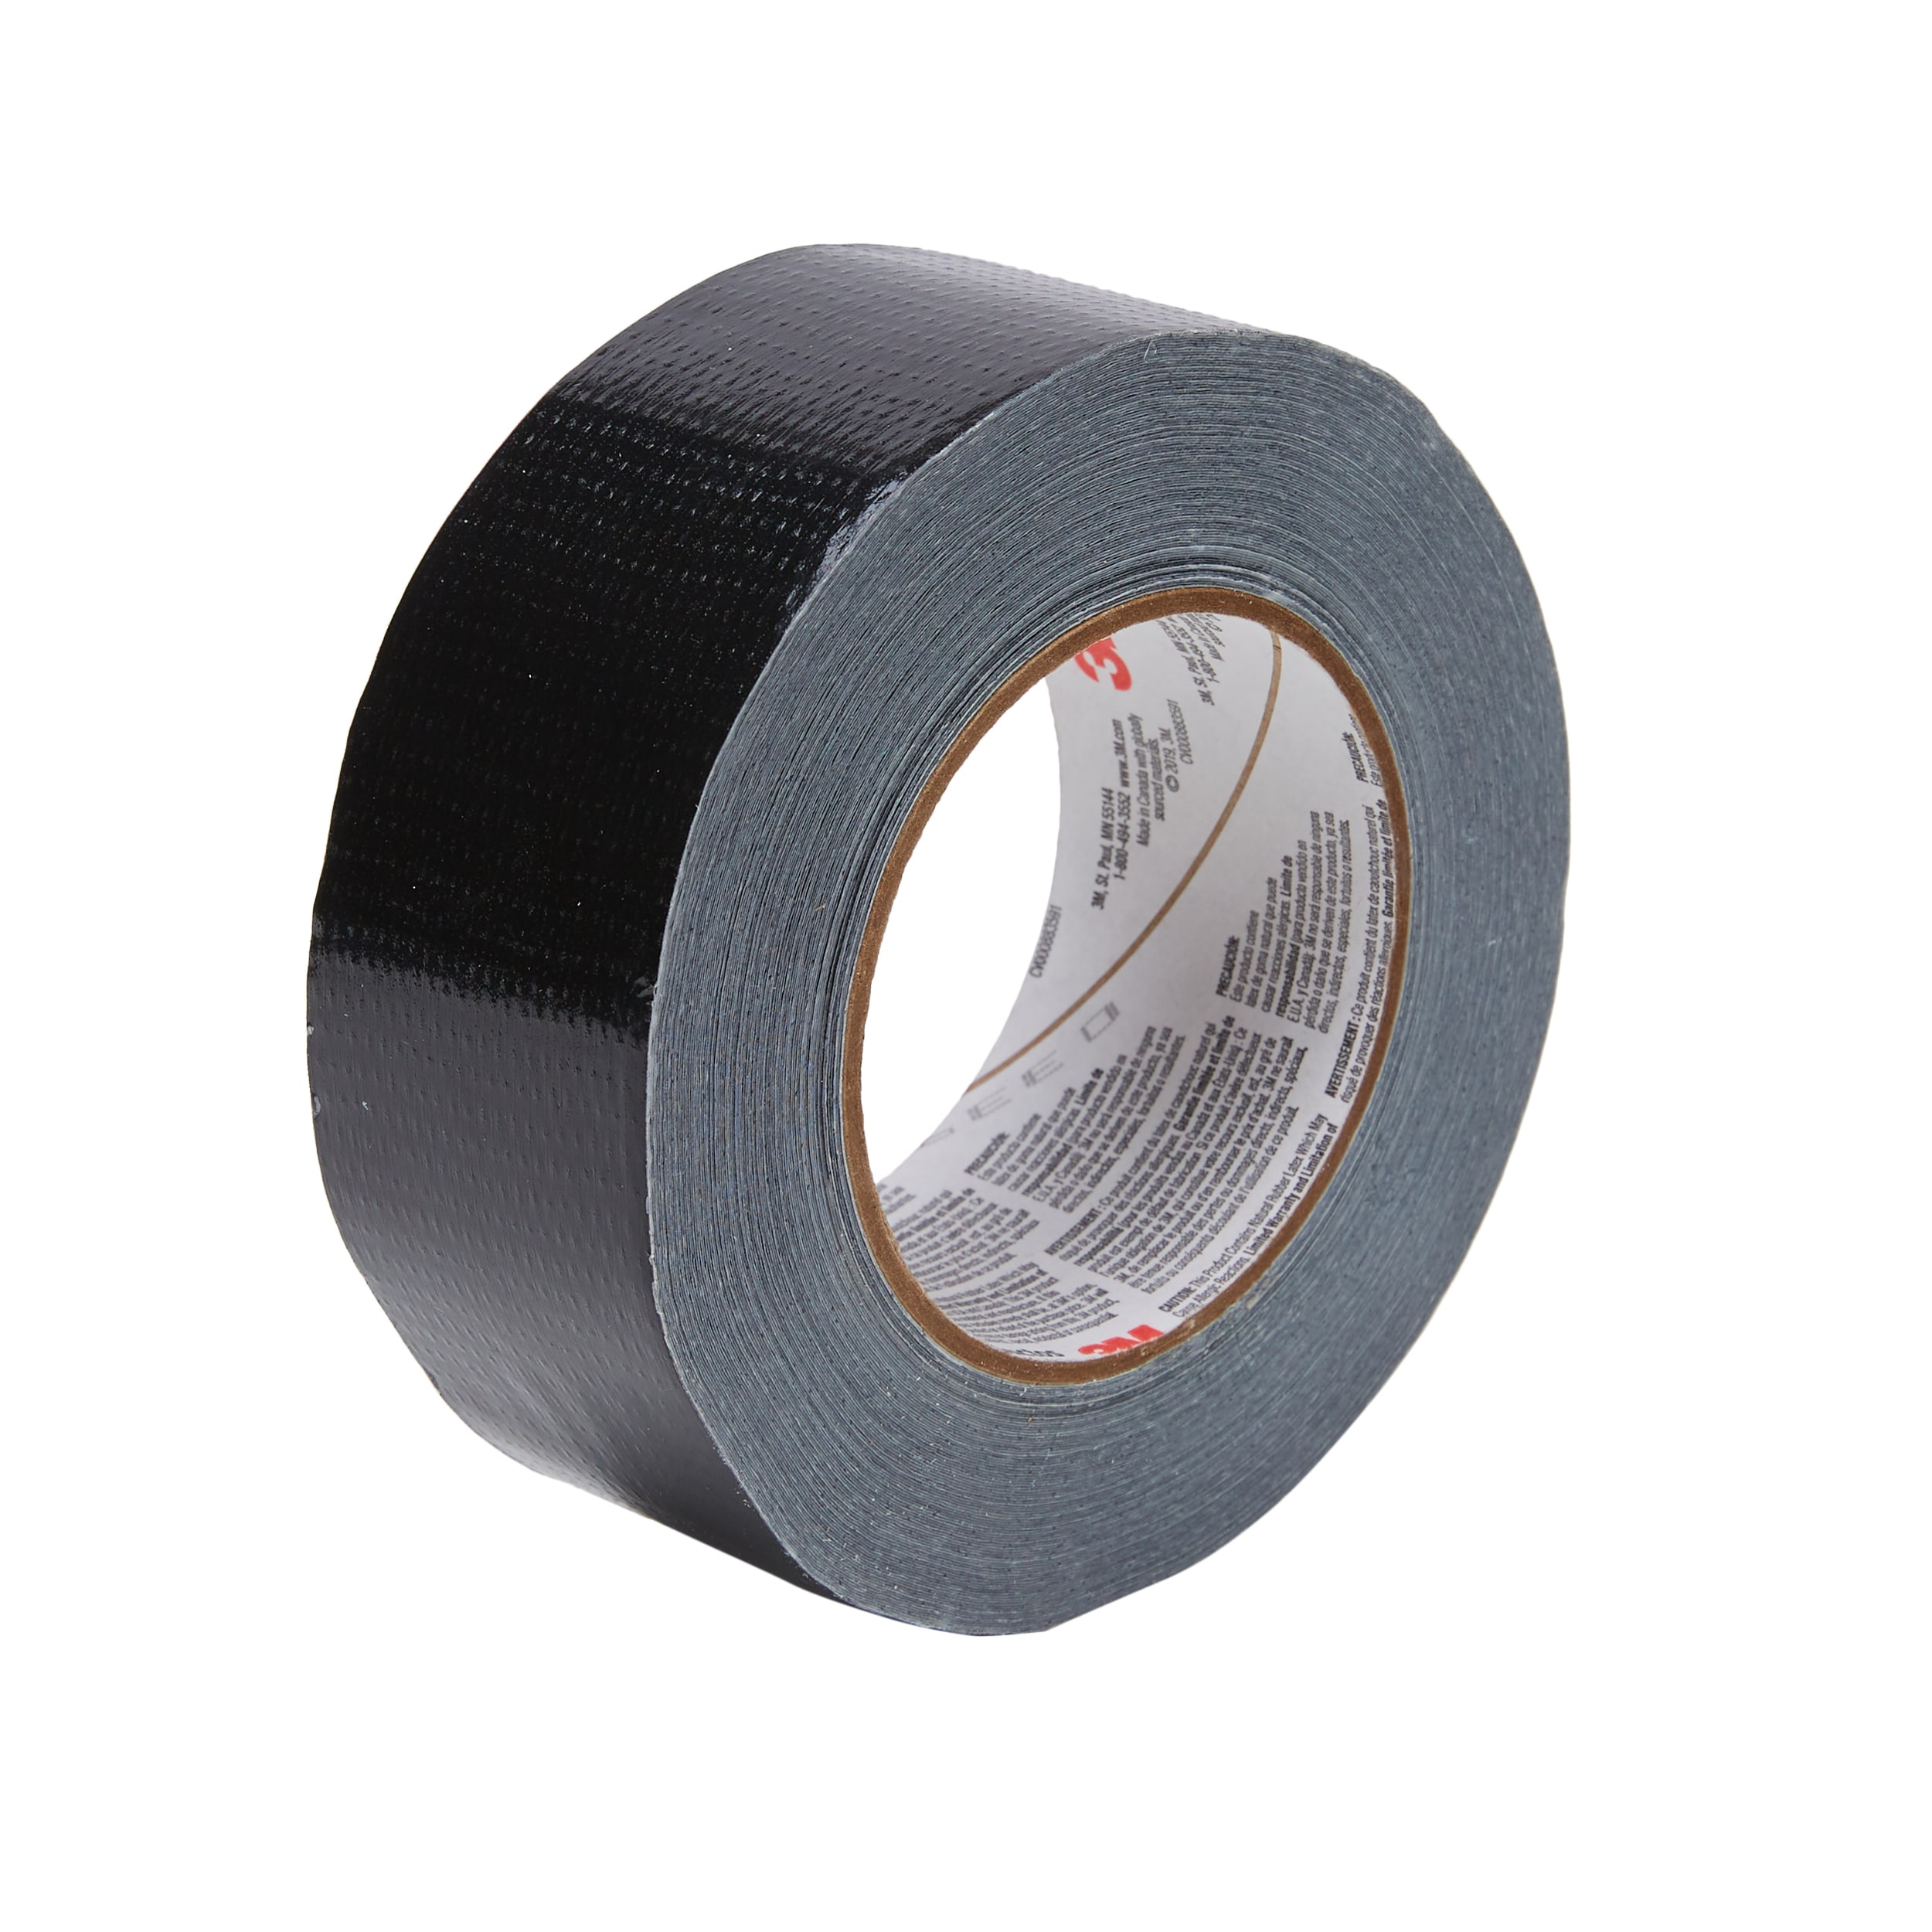 Pack-n-Tape  3M 2245-A 3M All-Weather Duct Tape, 1.88 in x 45 yd (48mm x  41,1m), 12 rls/cs